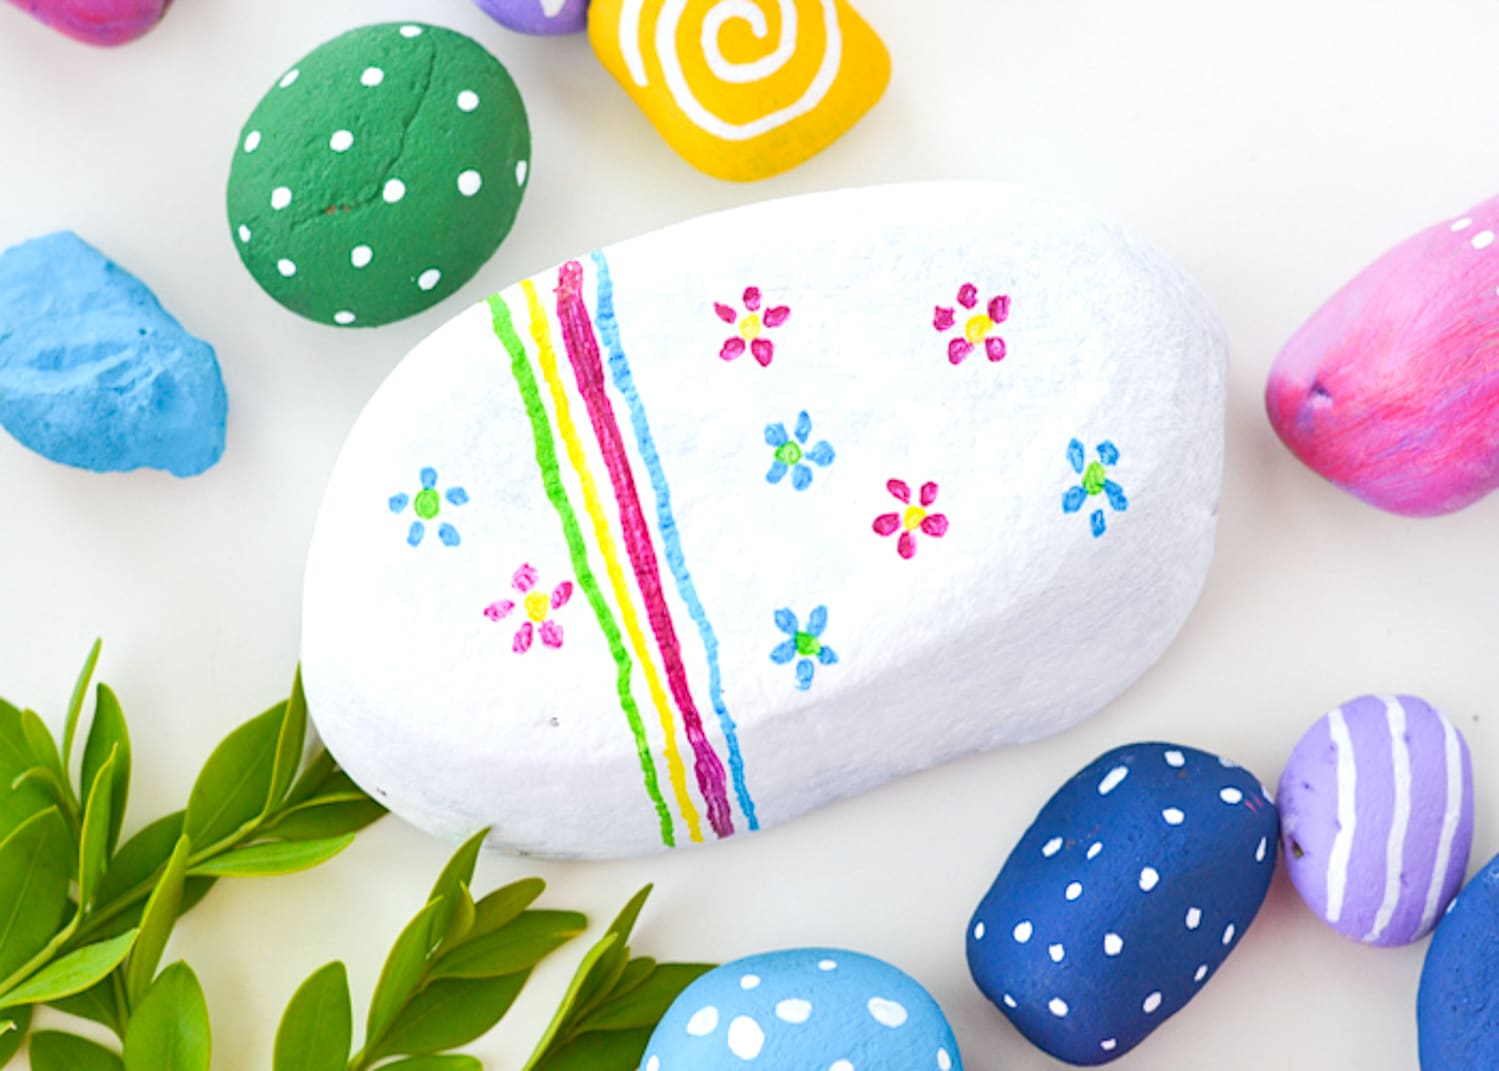 Get creative with this painted rock art project - a perfect craft for camping, at the cabin, or just in the backyard!